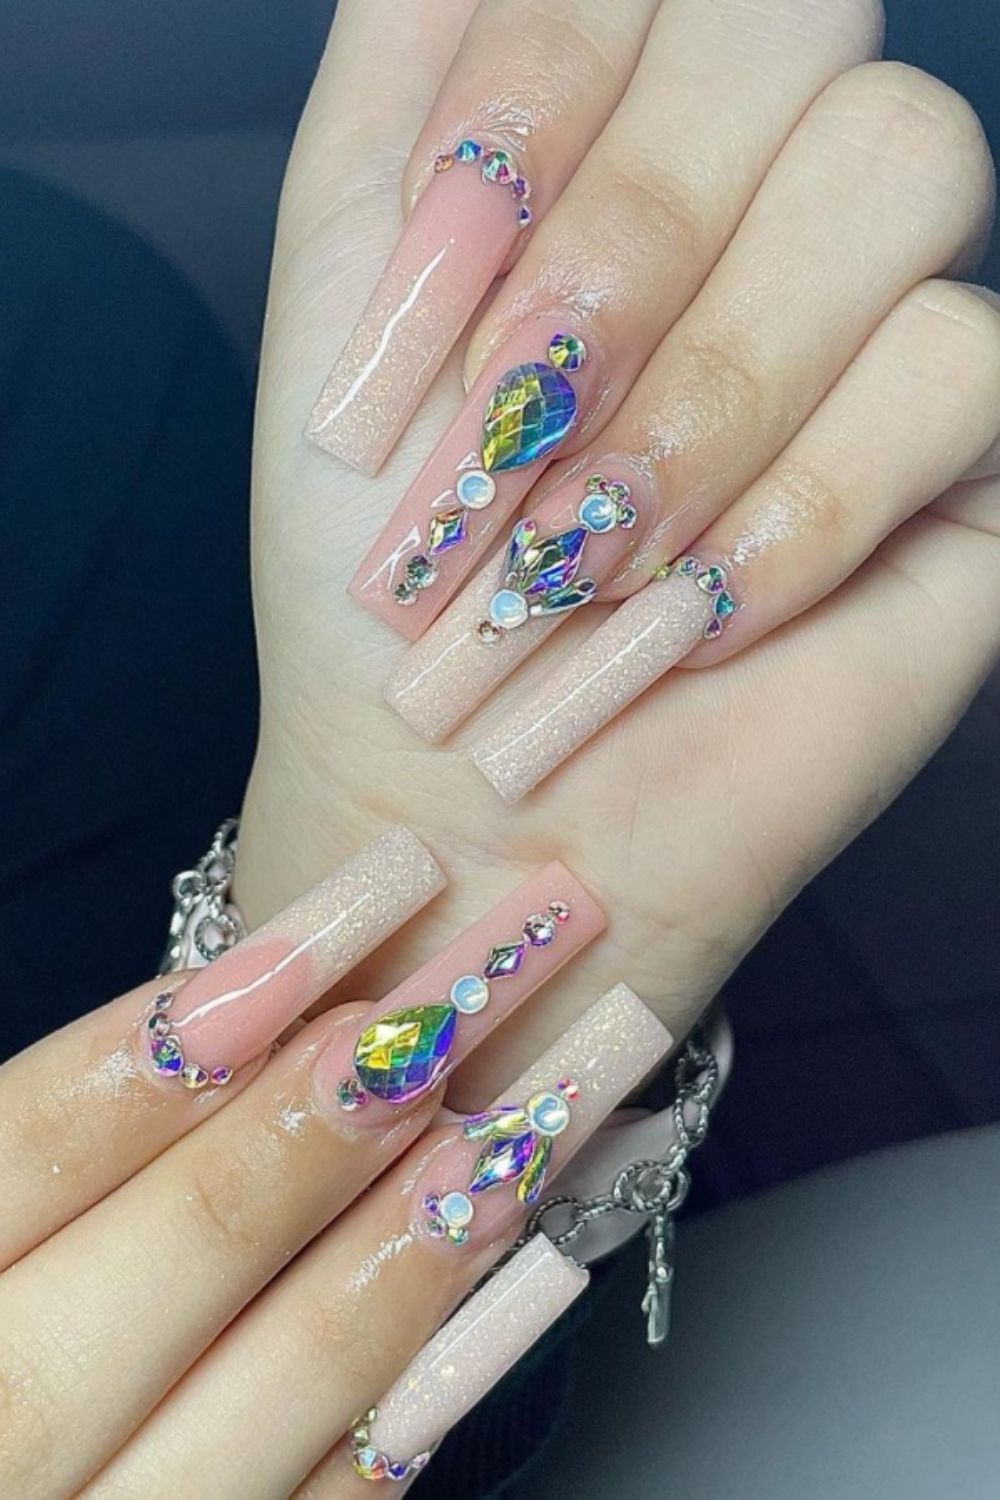 45 Stunning Coffin Nails Design Ideas For Summer nails 2021